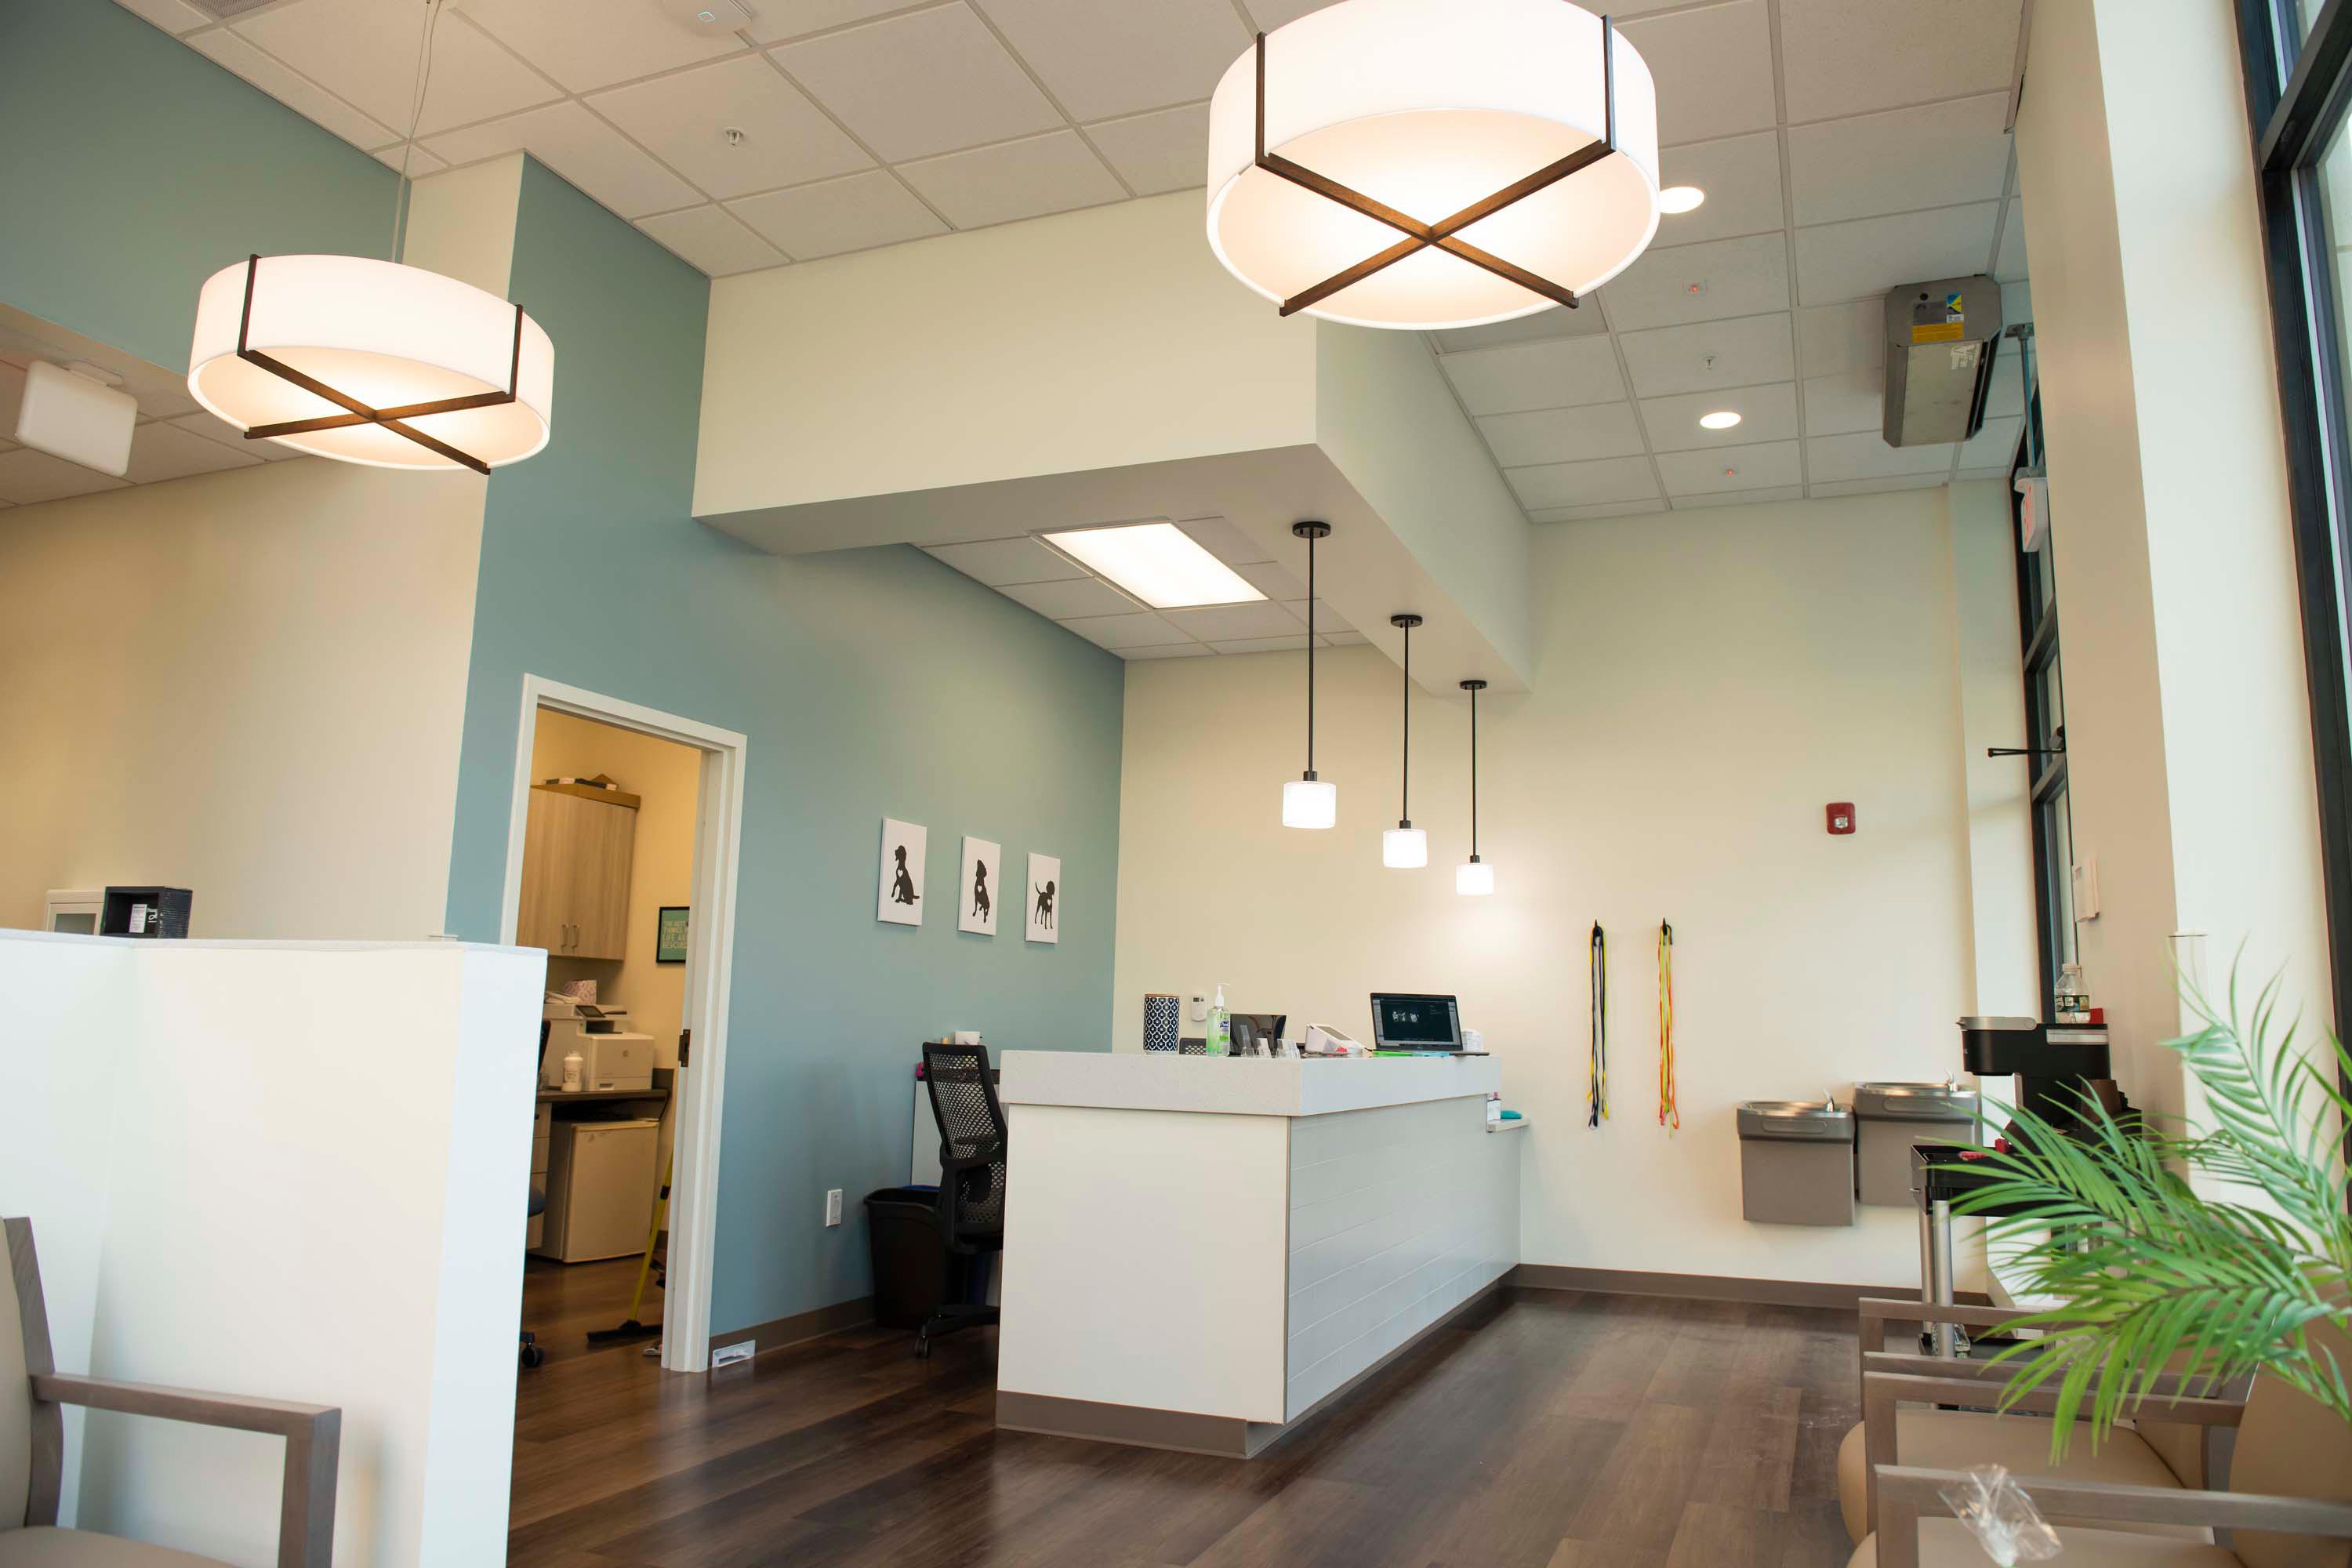 Harvester Veterinary Hospital's beautiful check-in and waiting area filled with lots of natural light and ample seating.